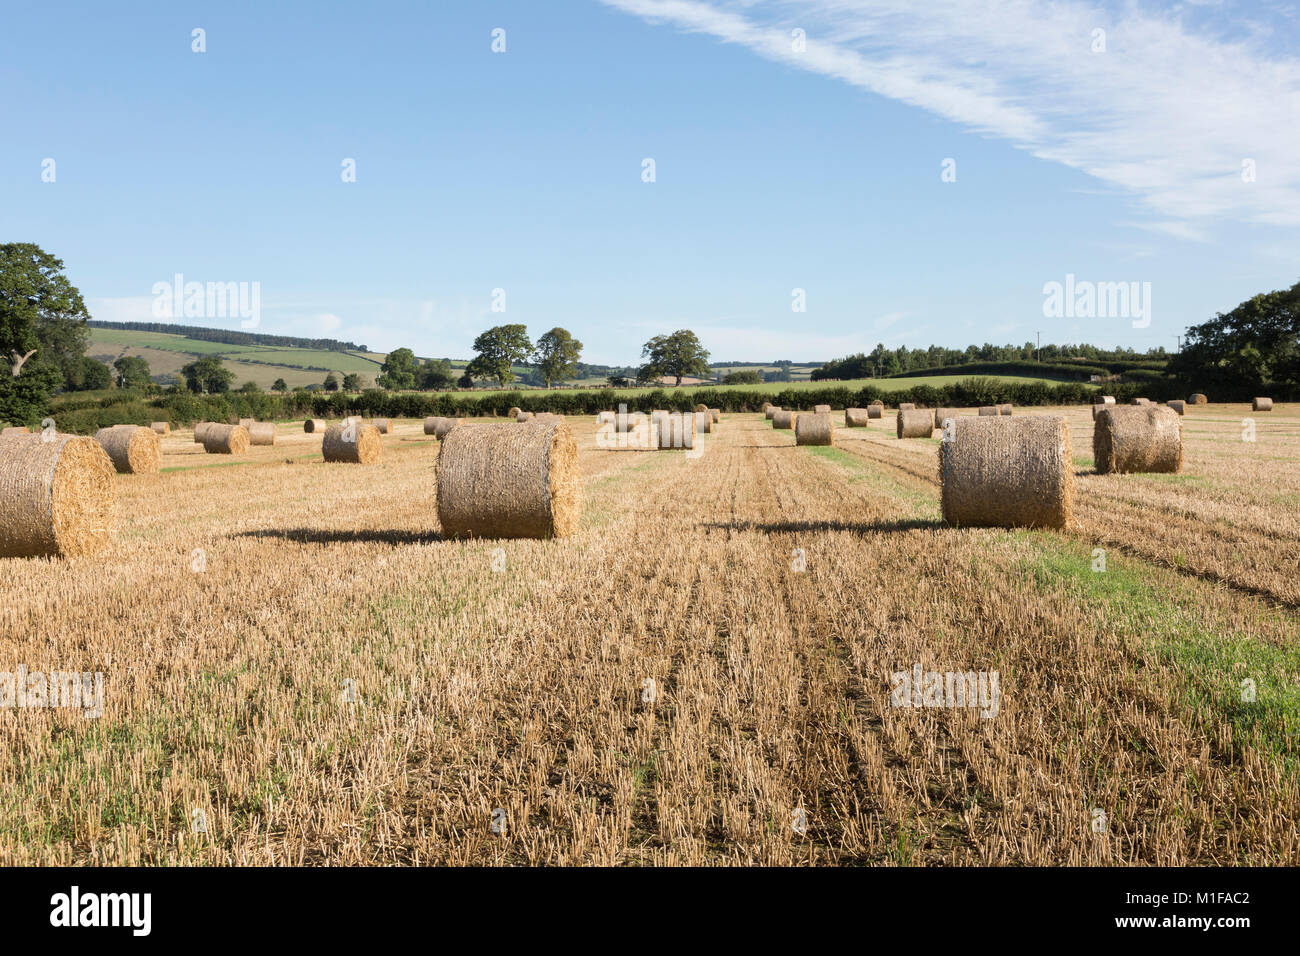 Round straw bales lying in field at harvest time Stock Photo